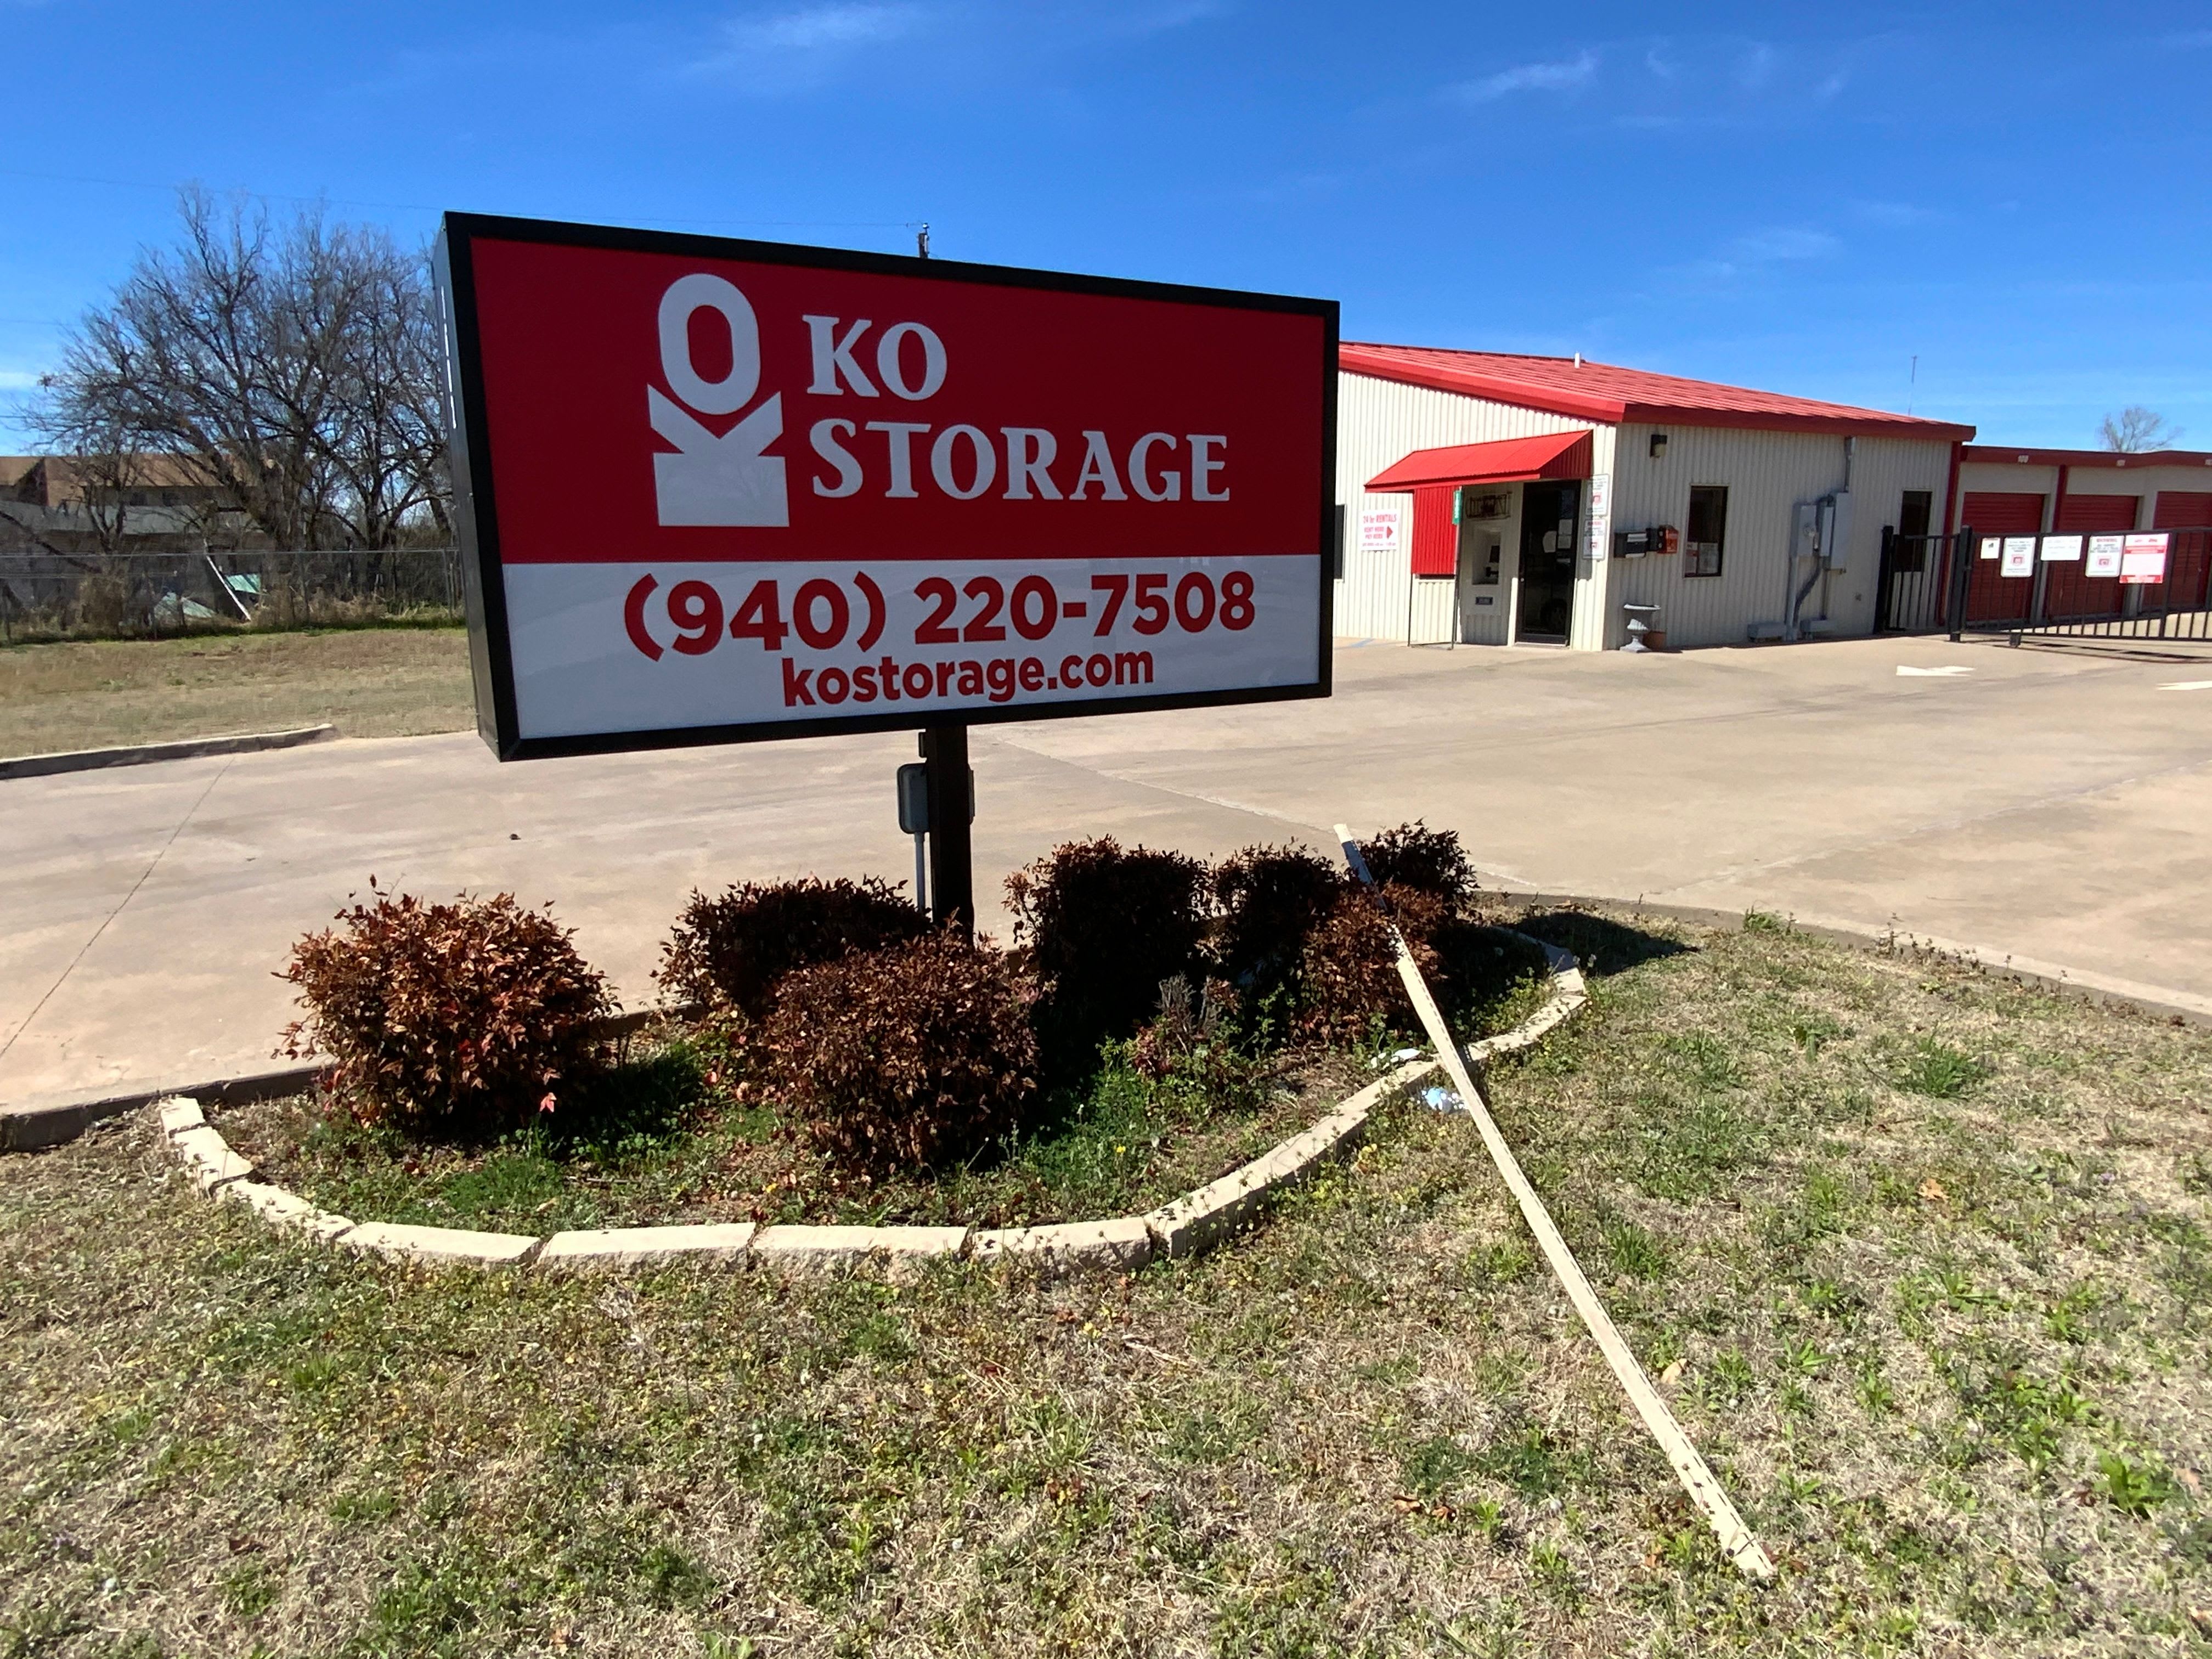 Learn more about RV, boat and auto storage at KO Storage in Wichita Falls, Texas